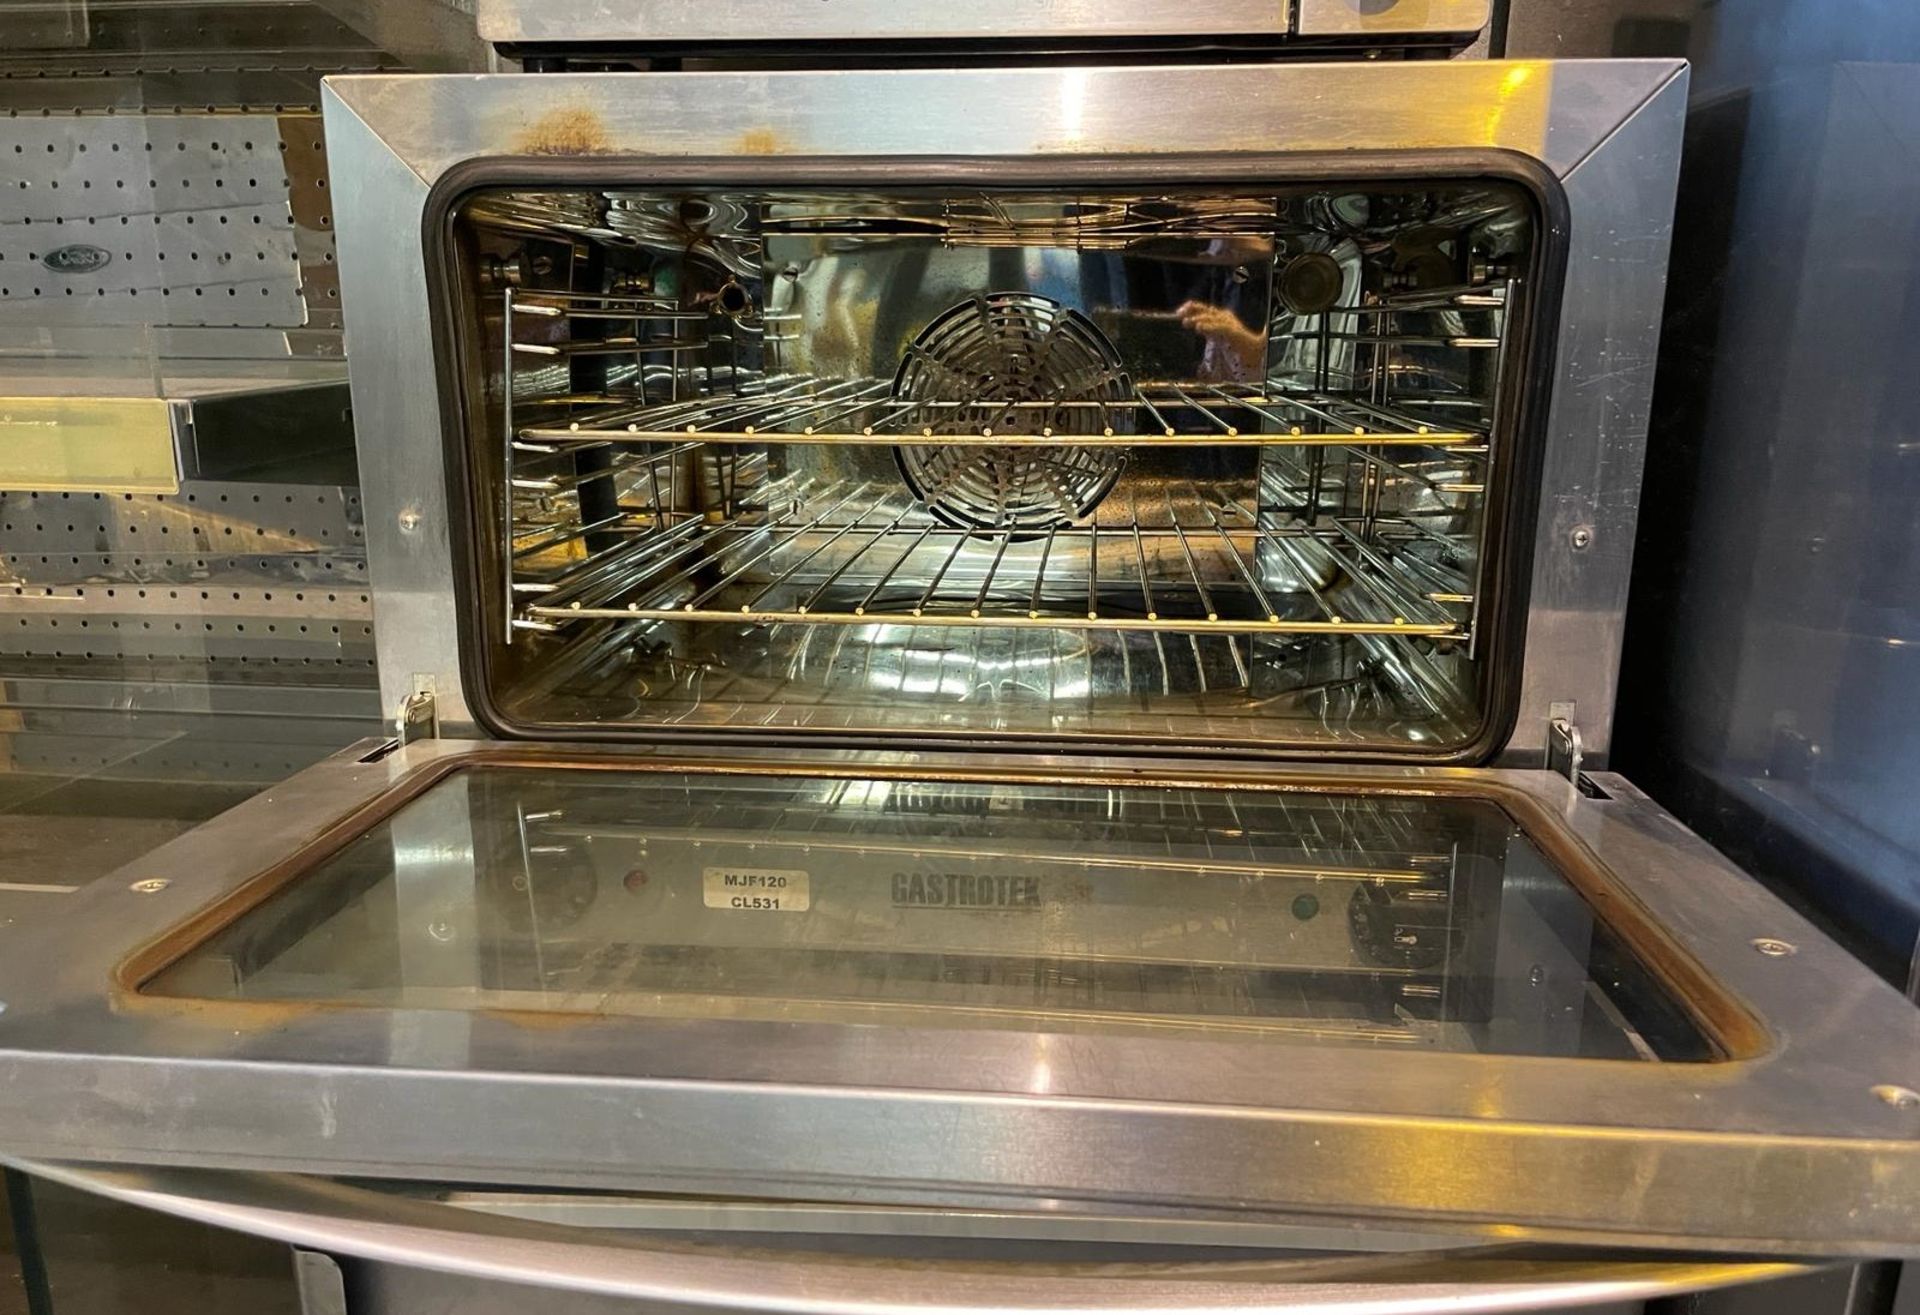 1 x Gastrotek Countertop Commercial Oven With a Stainless Steel Finish - Image 5 of 5